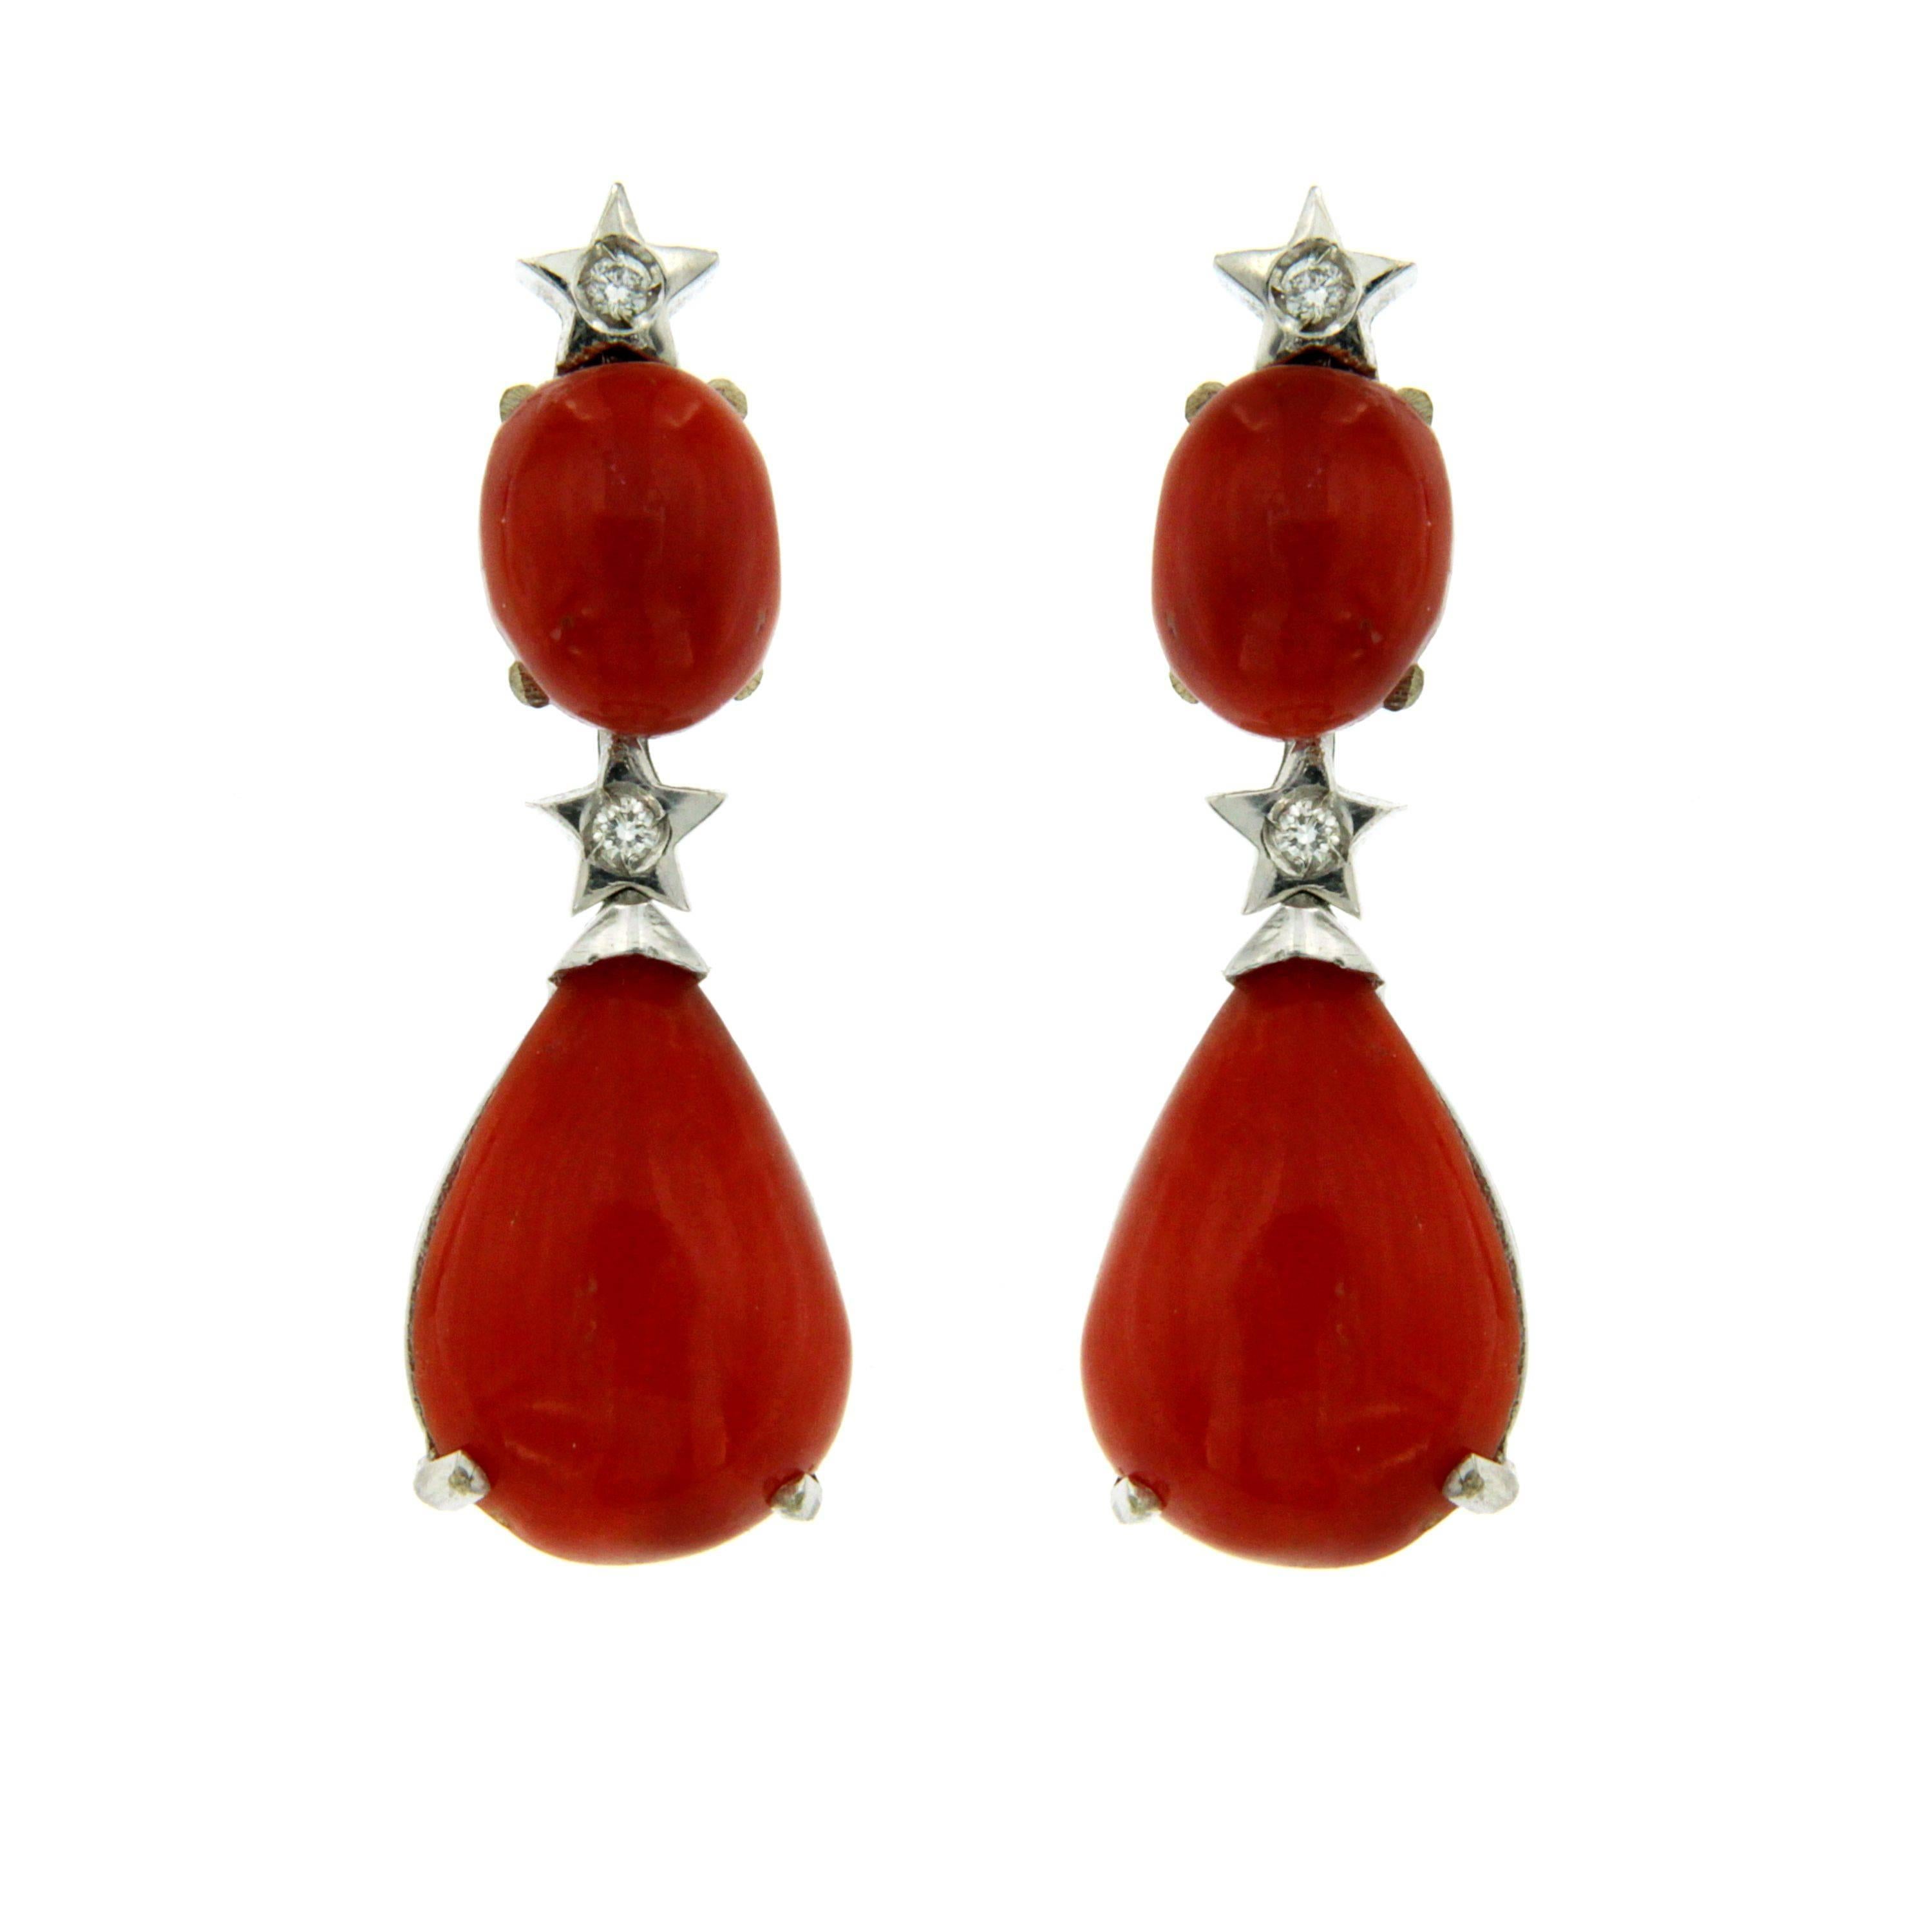 Vintage earrings handcrafted in 18k white gold showcasing four drop Sardinian Coral  2.20 total grams and accented by 0.10 carats of diamonds. Circa 1980

CONDITION: Pre-owned - Excellent 
METAL: 18k white Gold 
STONE: Coral 2.20 grams - Diamond